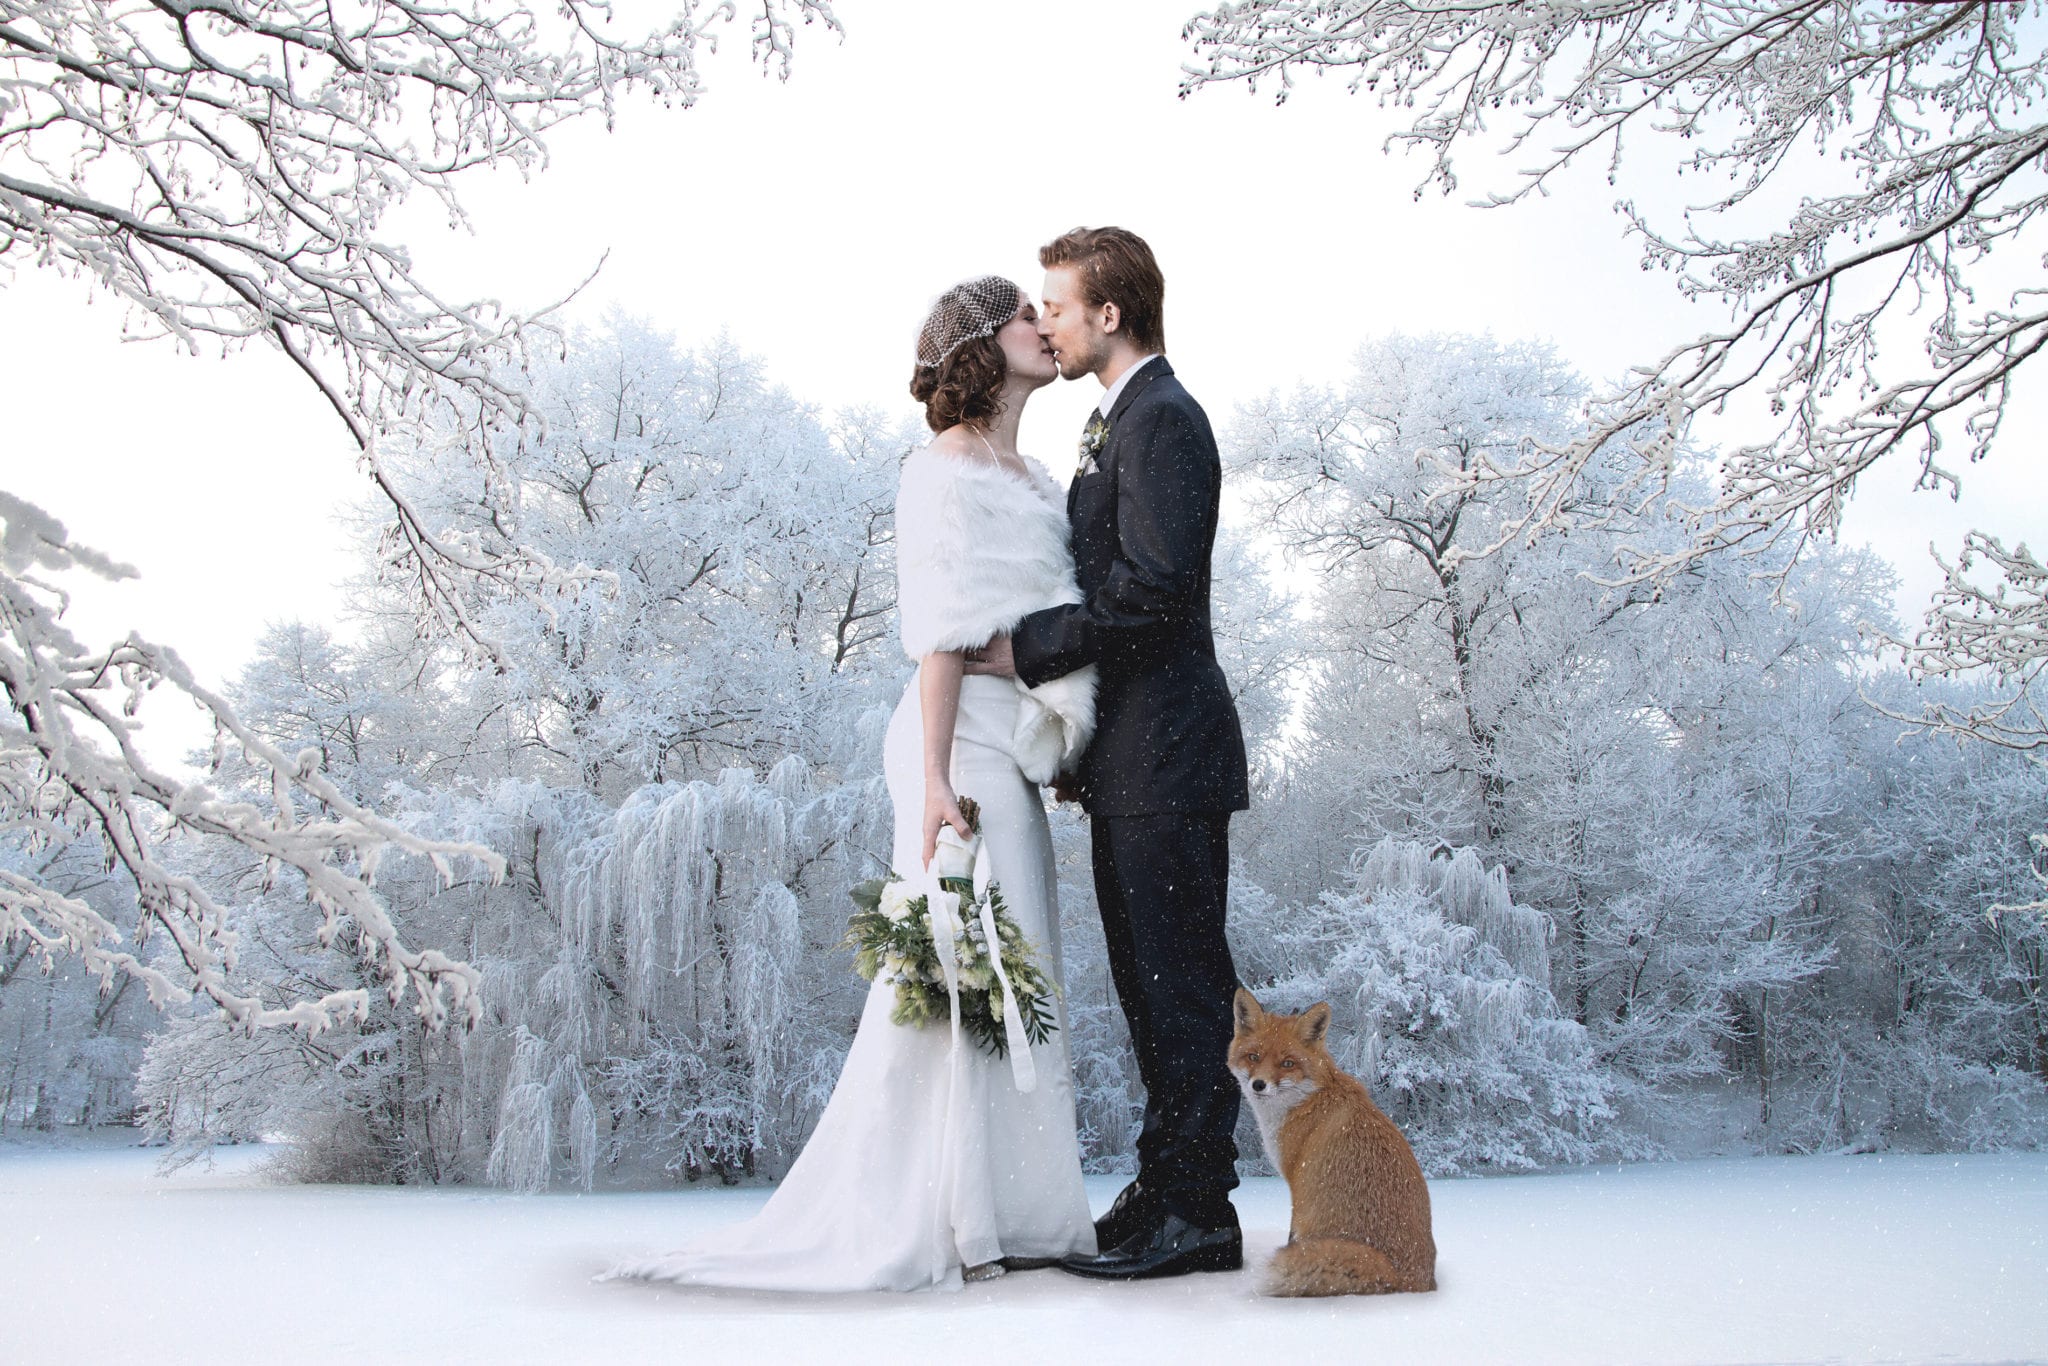 3 Ways To Add Christmas Cheer To Your Wedding